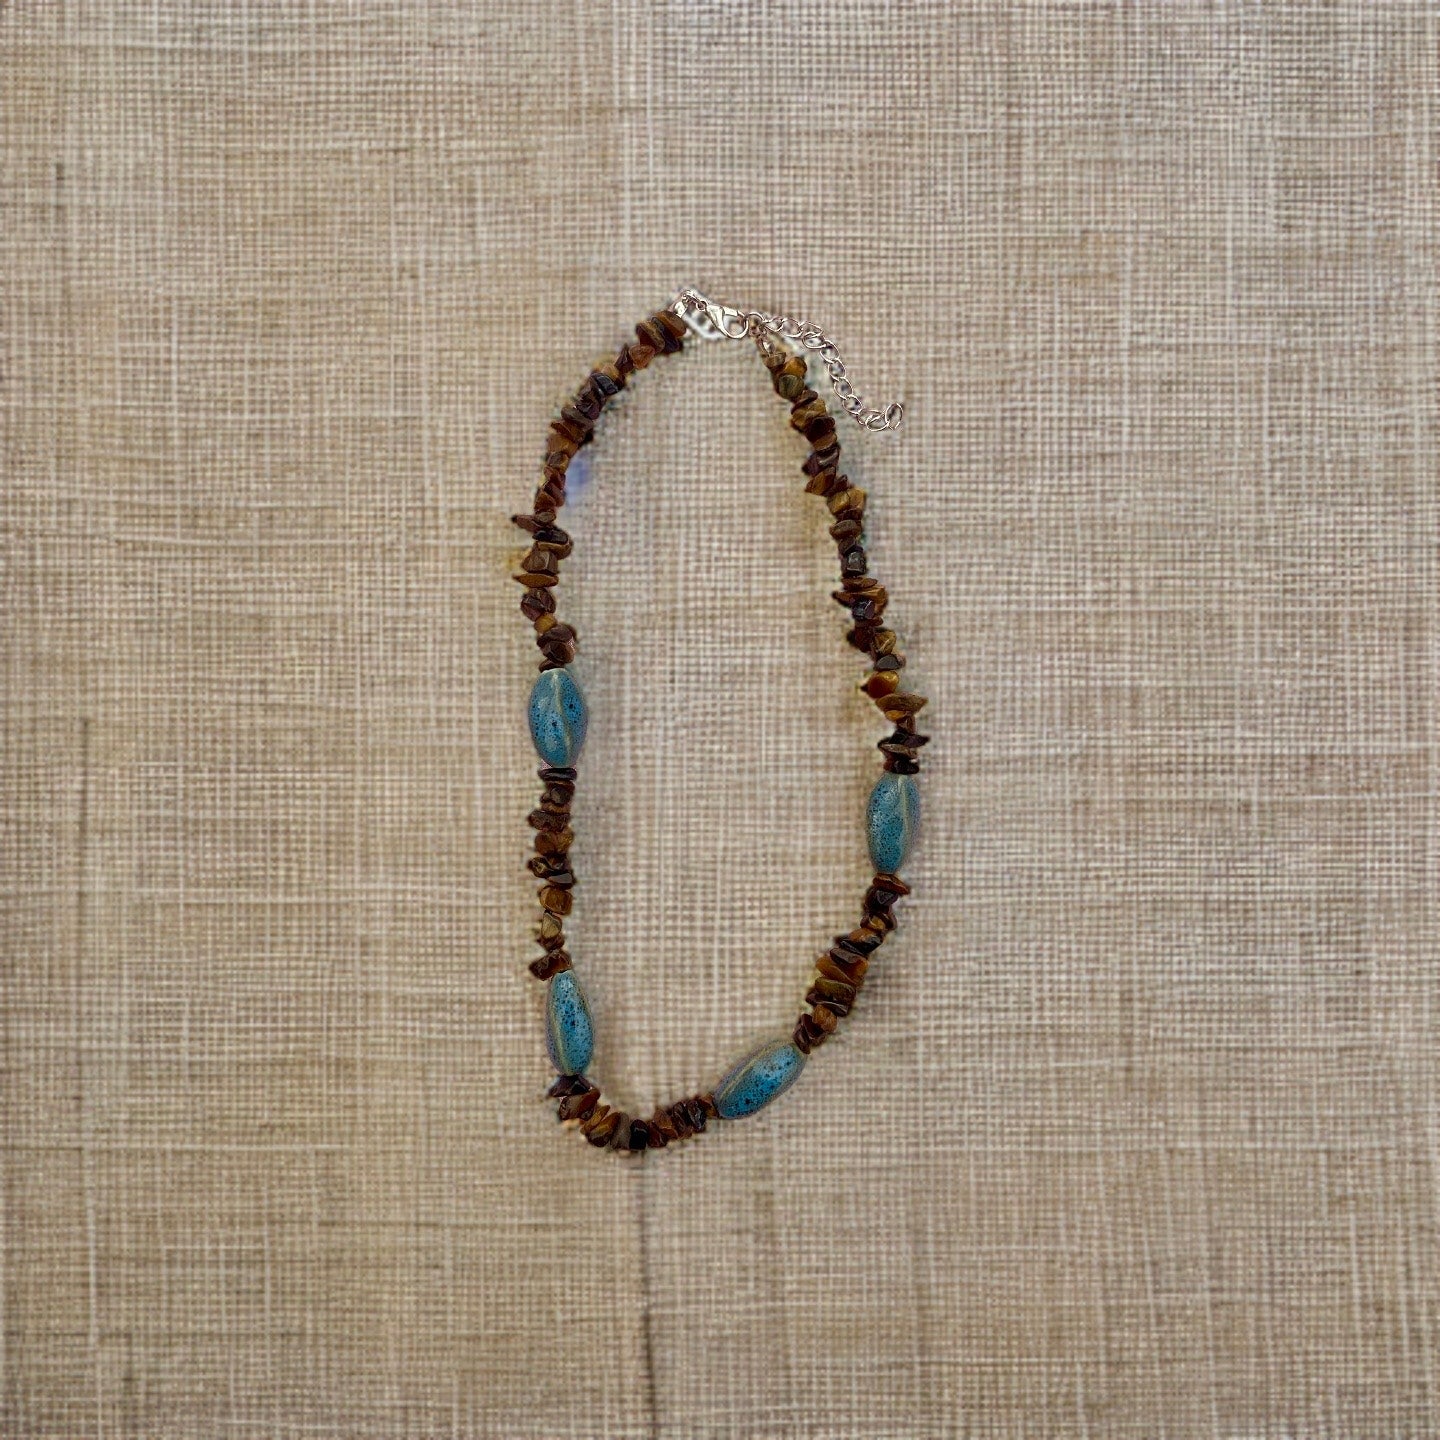 Handmade Bead Necklaces for Positivity and Joy - SBJ